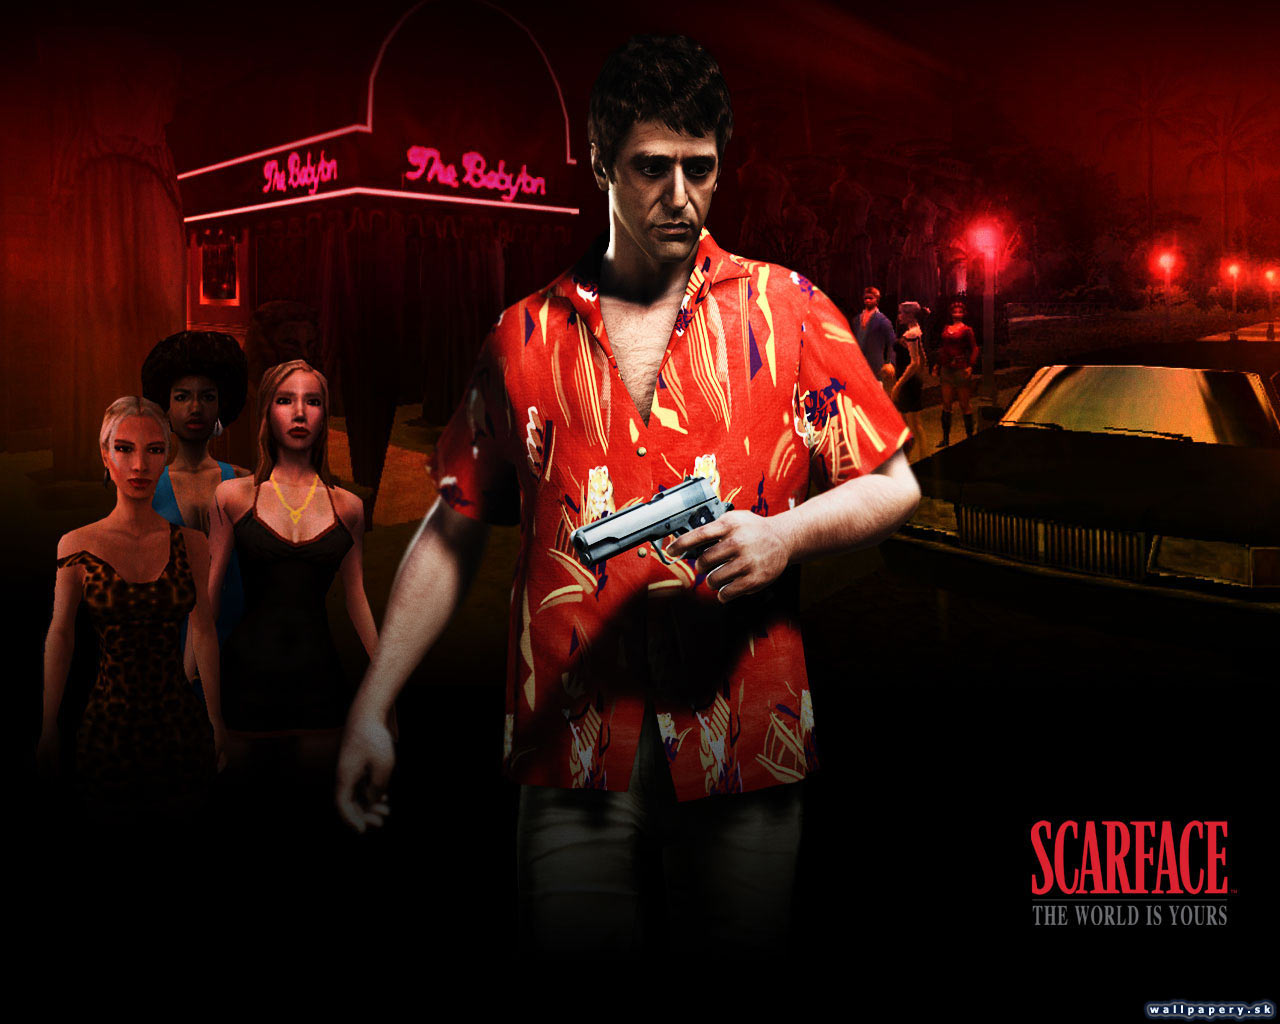 Scarface: The World Is Yours - wallpaper 5